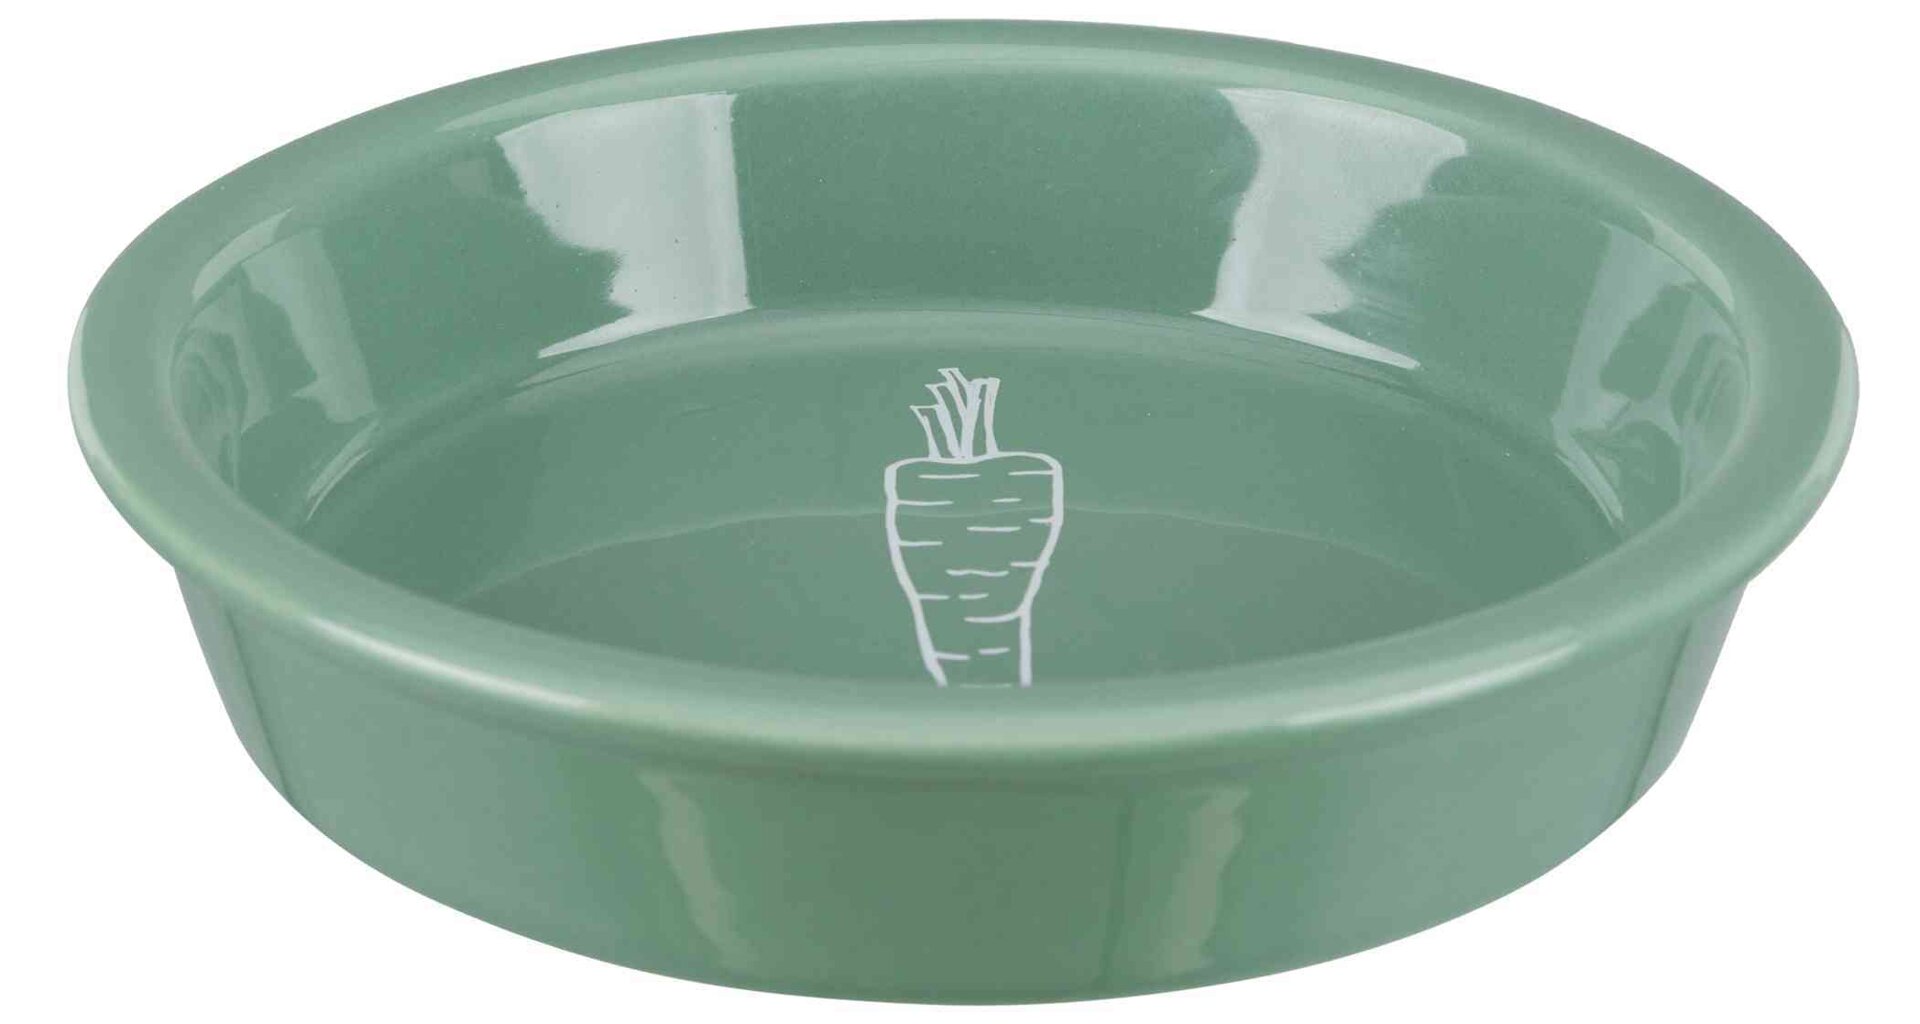 Trixie ceramic bowl with carrot motif for rabbits 200ml/14cm